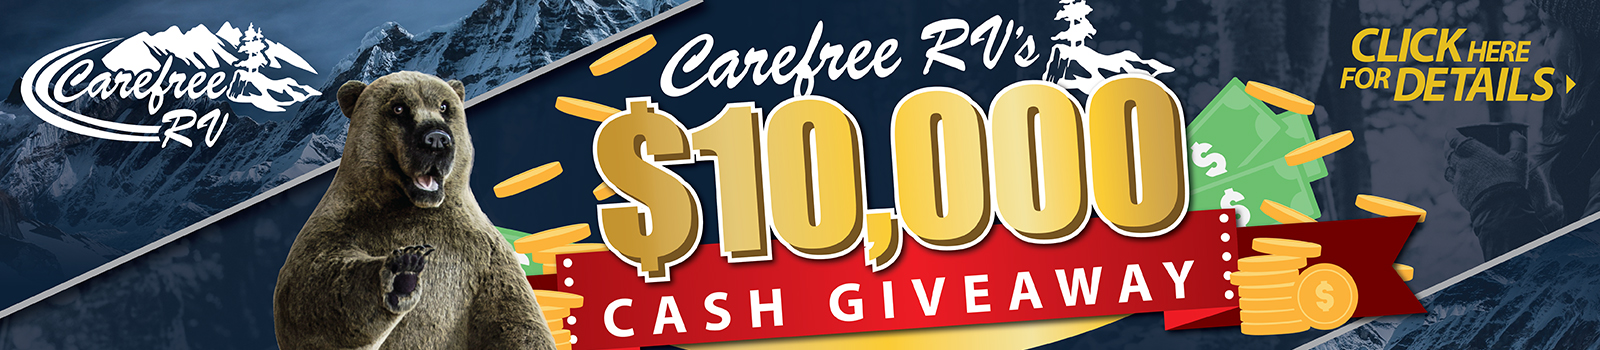 $10000 Carefree's Cash Giveaway